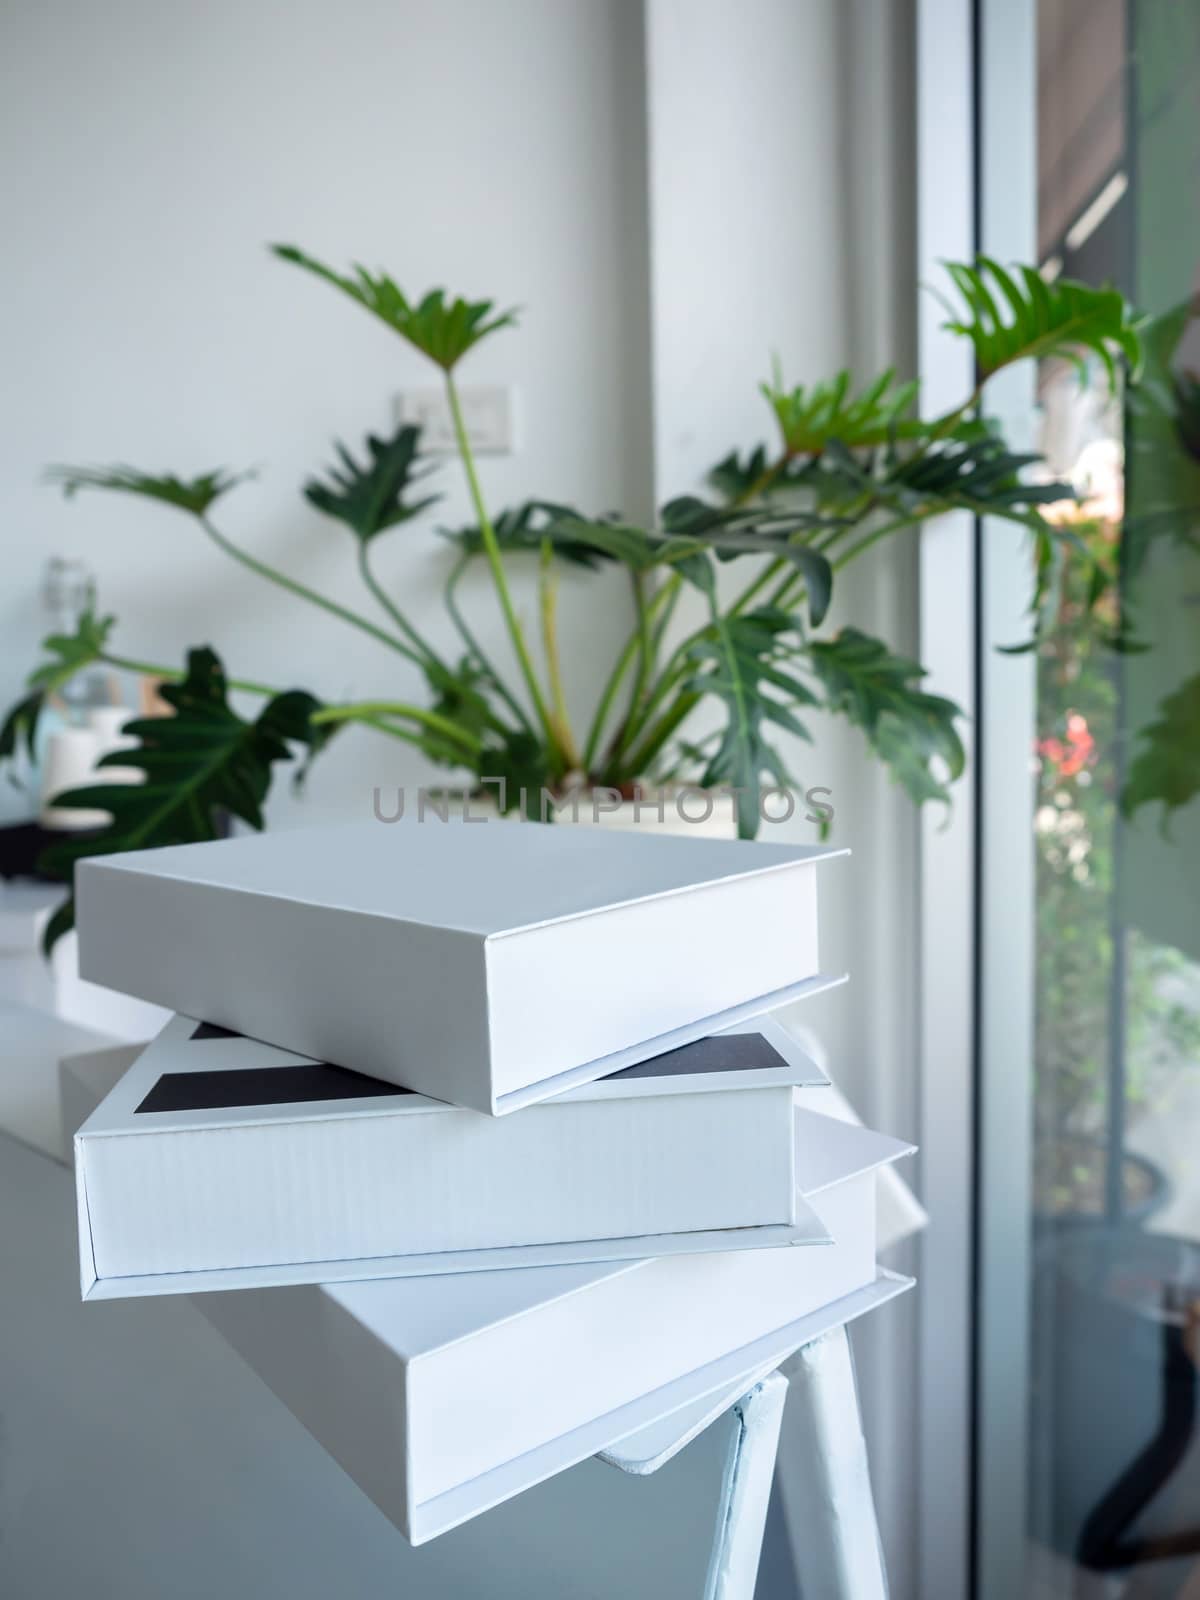 stack of white books on white shelf near green leaves in pot and glass window in white cafe background minimal style, vertical style.